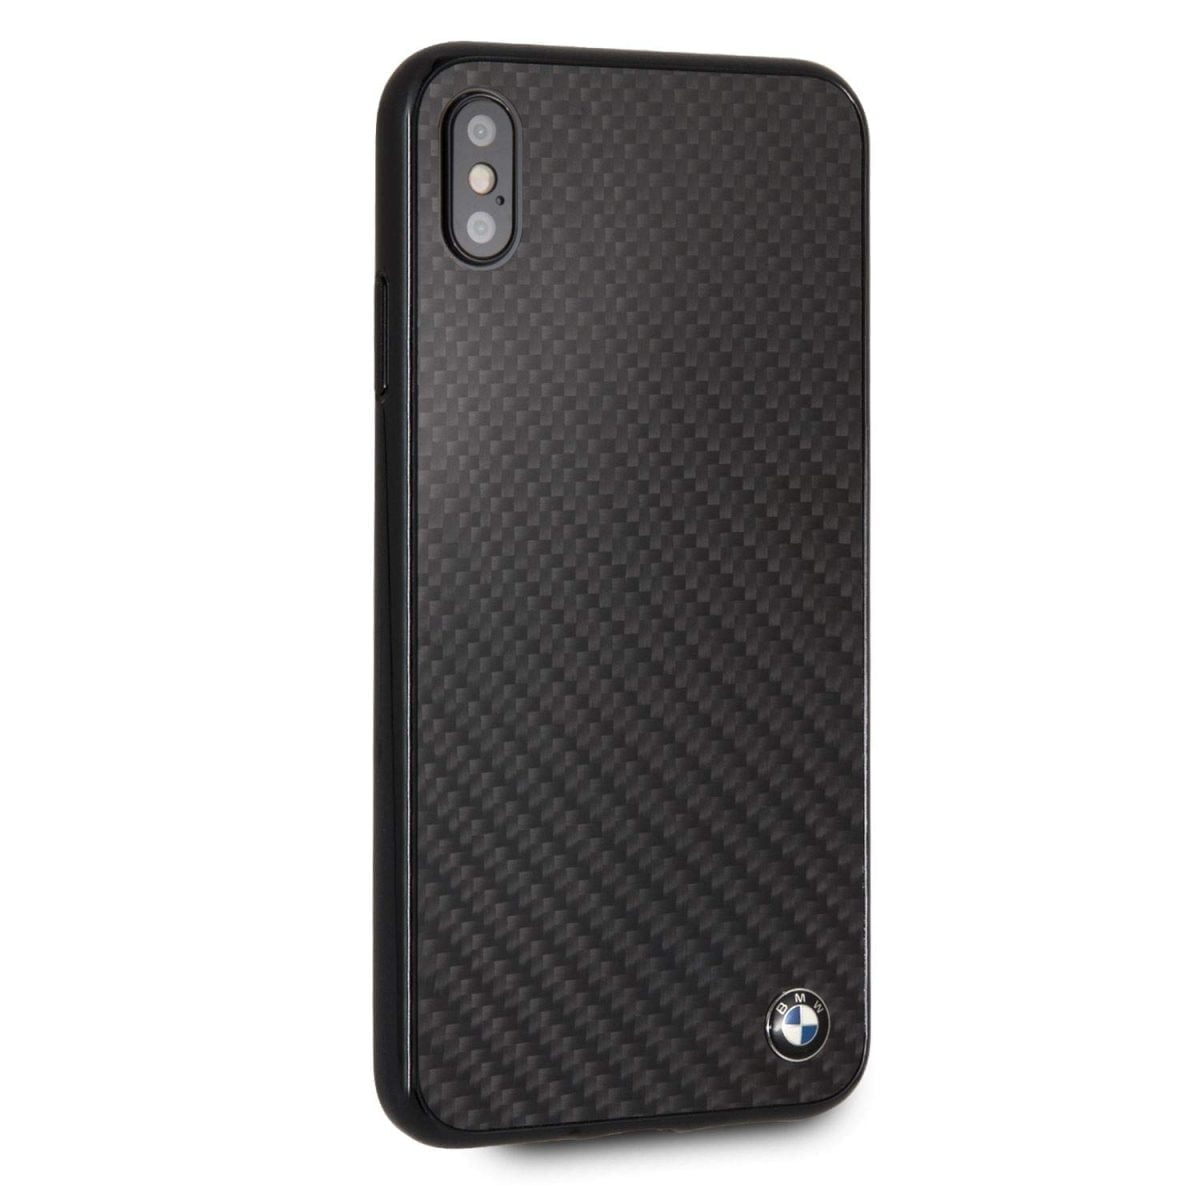 Cg Mobile Bmw Iphone Xs Max Case Black Carbon Hard Cell Phone Case Carbon Fiber Easily Accessible Ports Officially Licensed 06 Iphone Case Iphone Xs Max Black Carbon Fiber (Bmw)